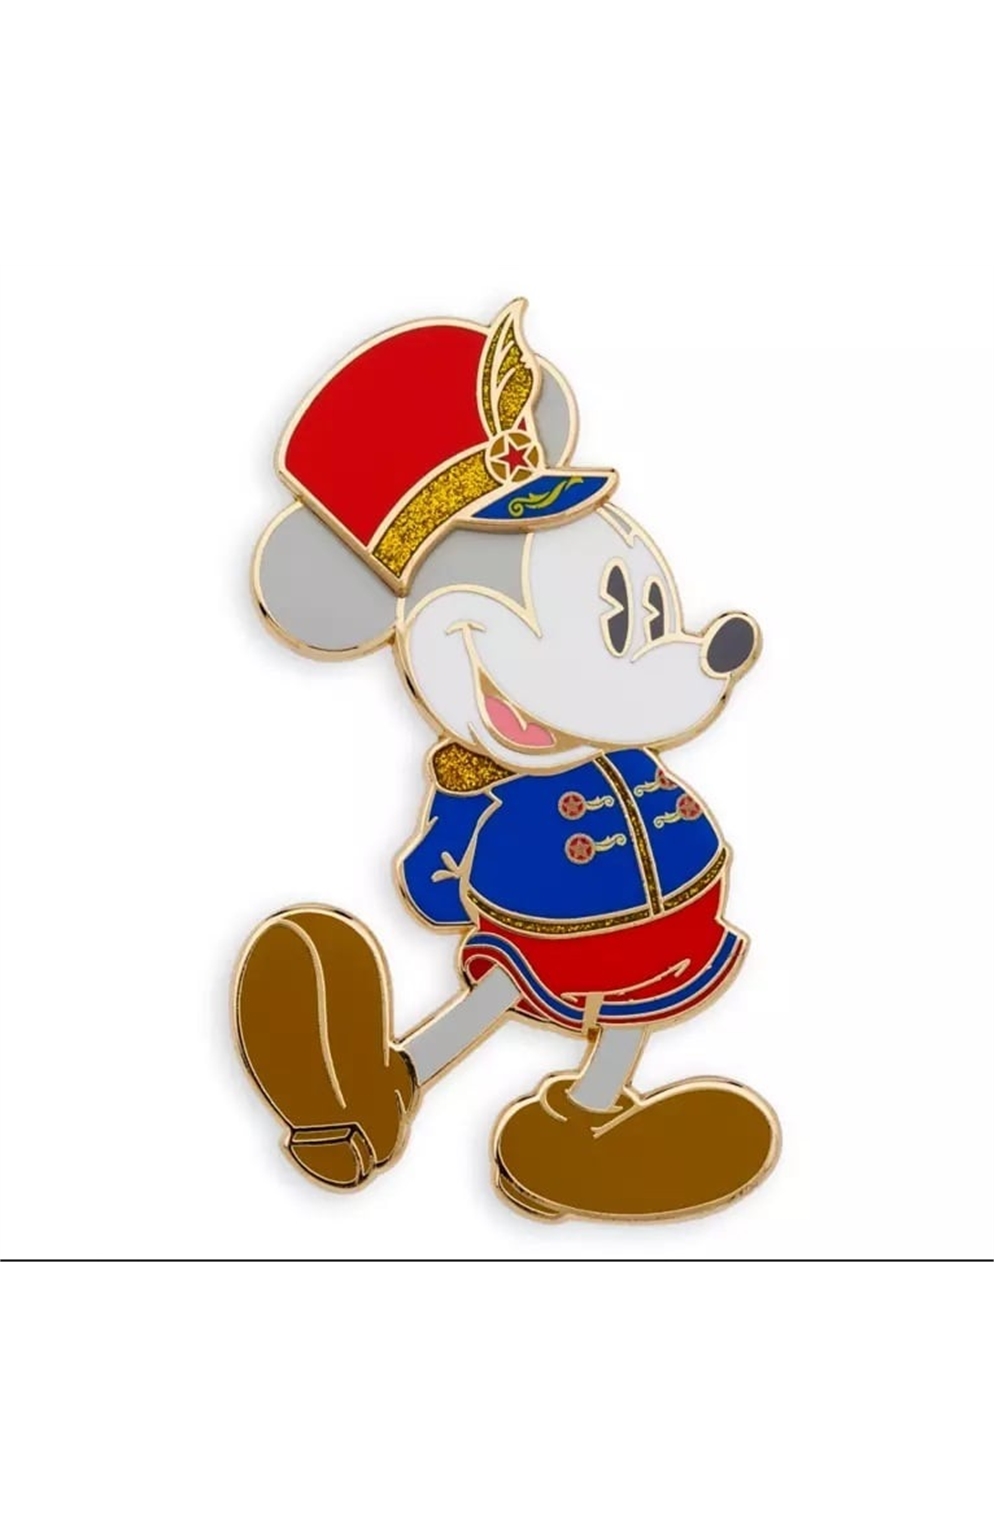 Disney Pin - Mickey Mouse The Main Attraction - Dumbo The Flying Elephant